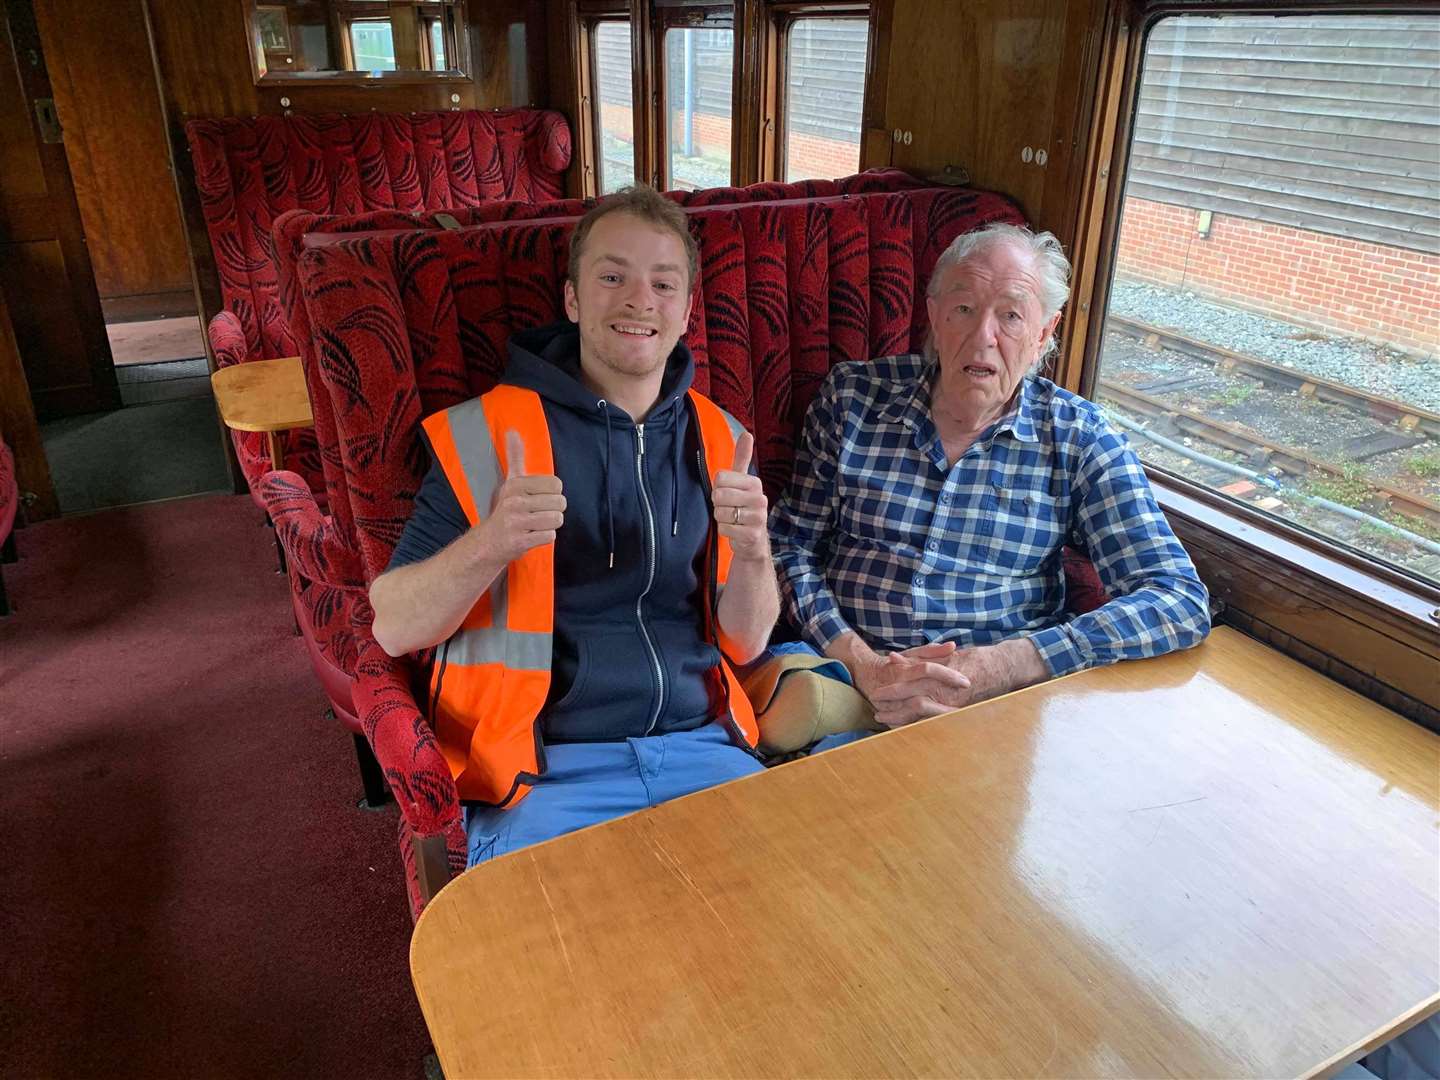 Michael Gambon was spotted on the Kent & East Sussex Railway by a fan in 2019